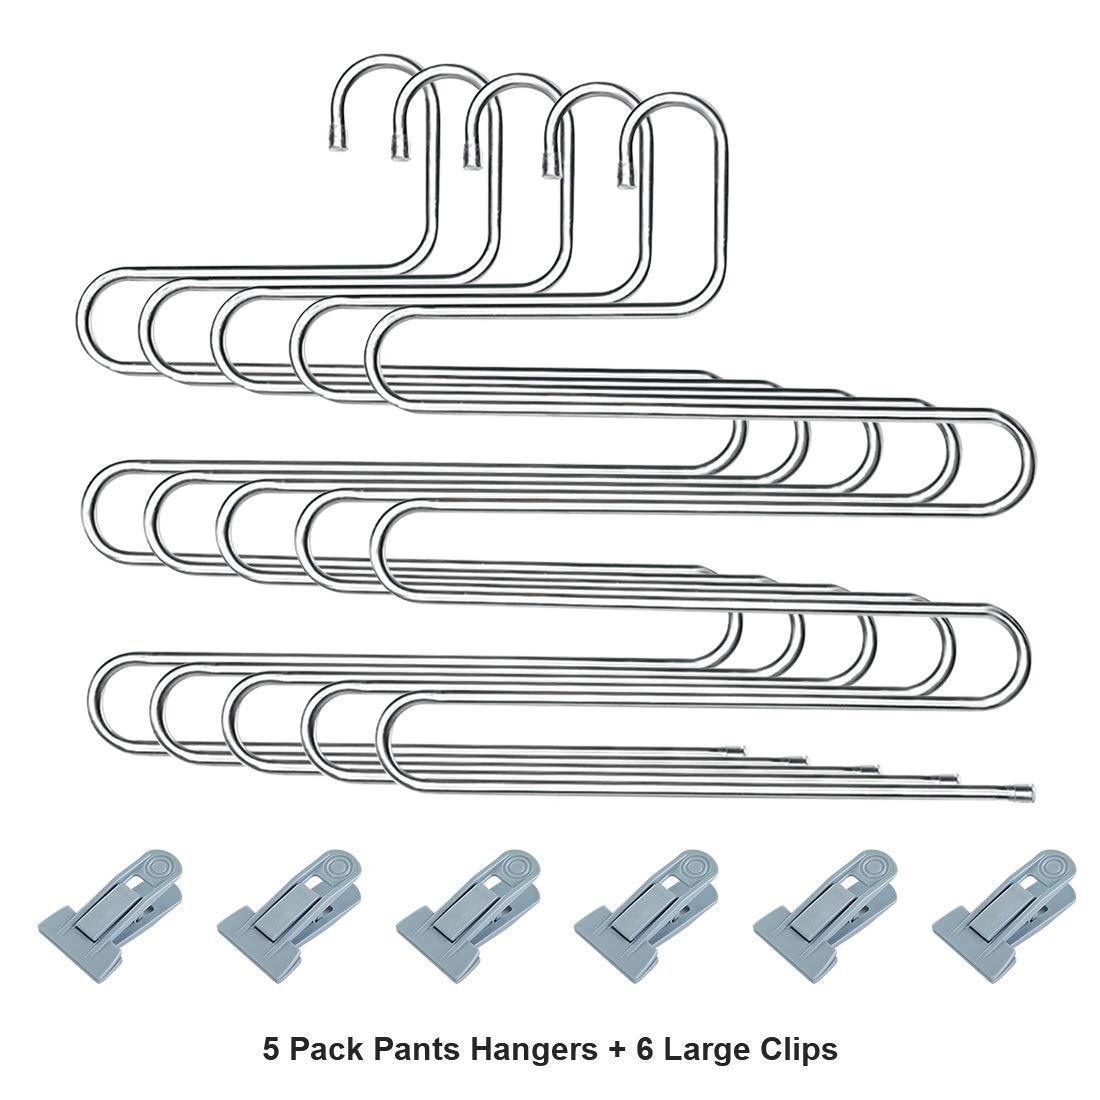 HonTop 5 Pack S-Type Multi-Purpose Pants Hangers Rack Stainless Steel Magic for Hanging Trousers Jeans Scarf Tie Clothes,Space Saving Storage Rack 5 Layers (5PCS)